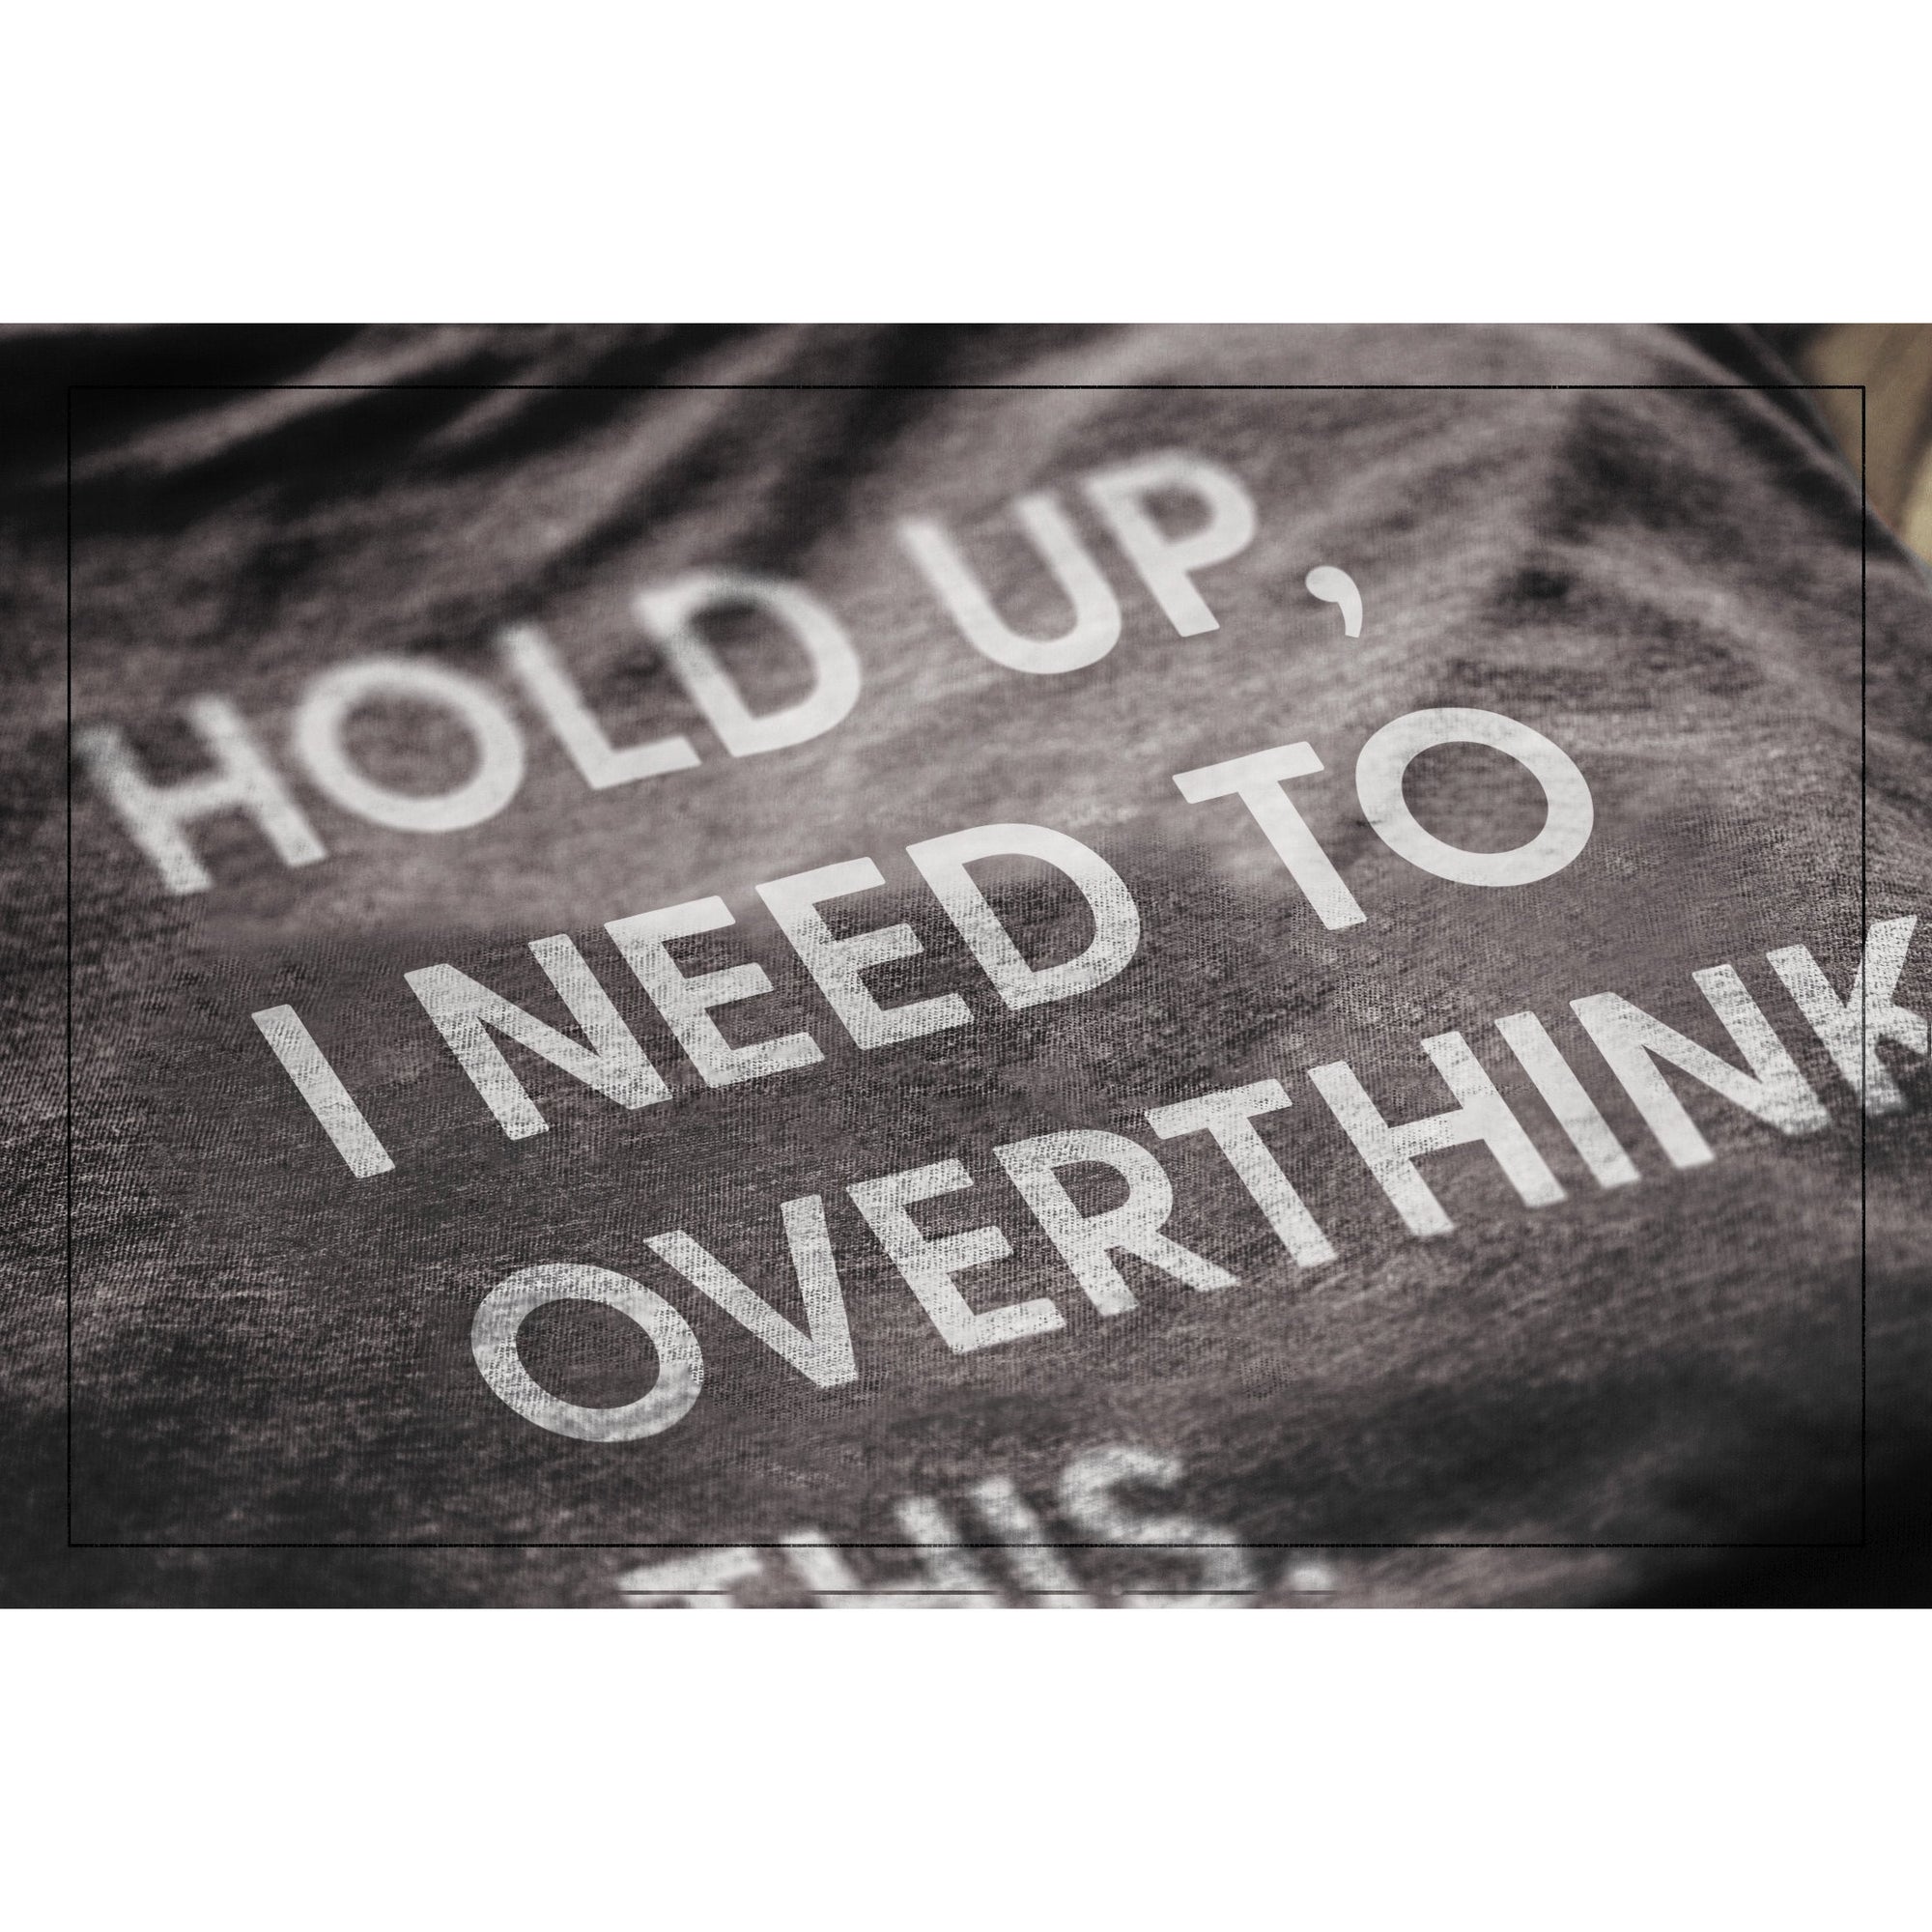 Hold Up, I Need To Rethink This Charcoal Printed Graphic Men's Crew T-Shirt Tee Closeup Details